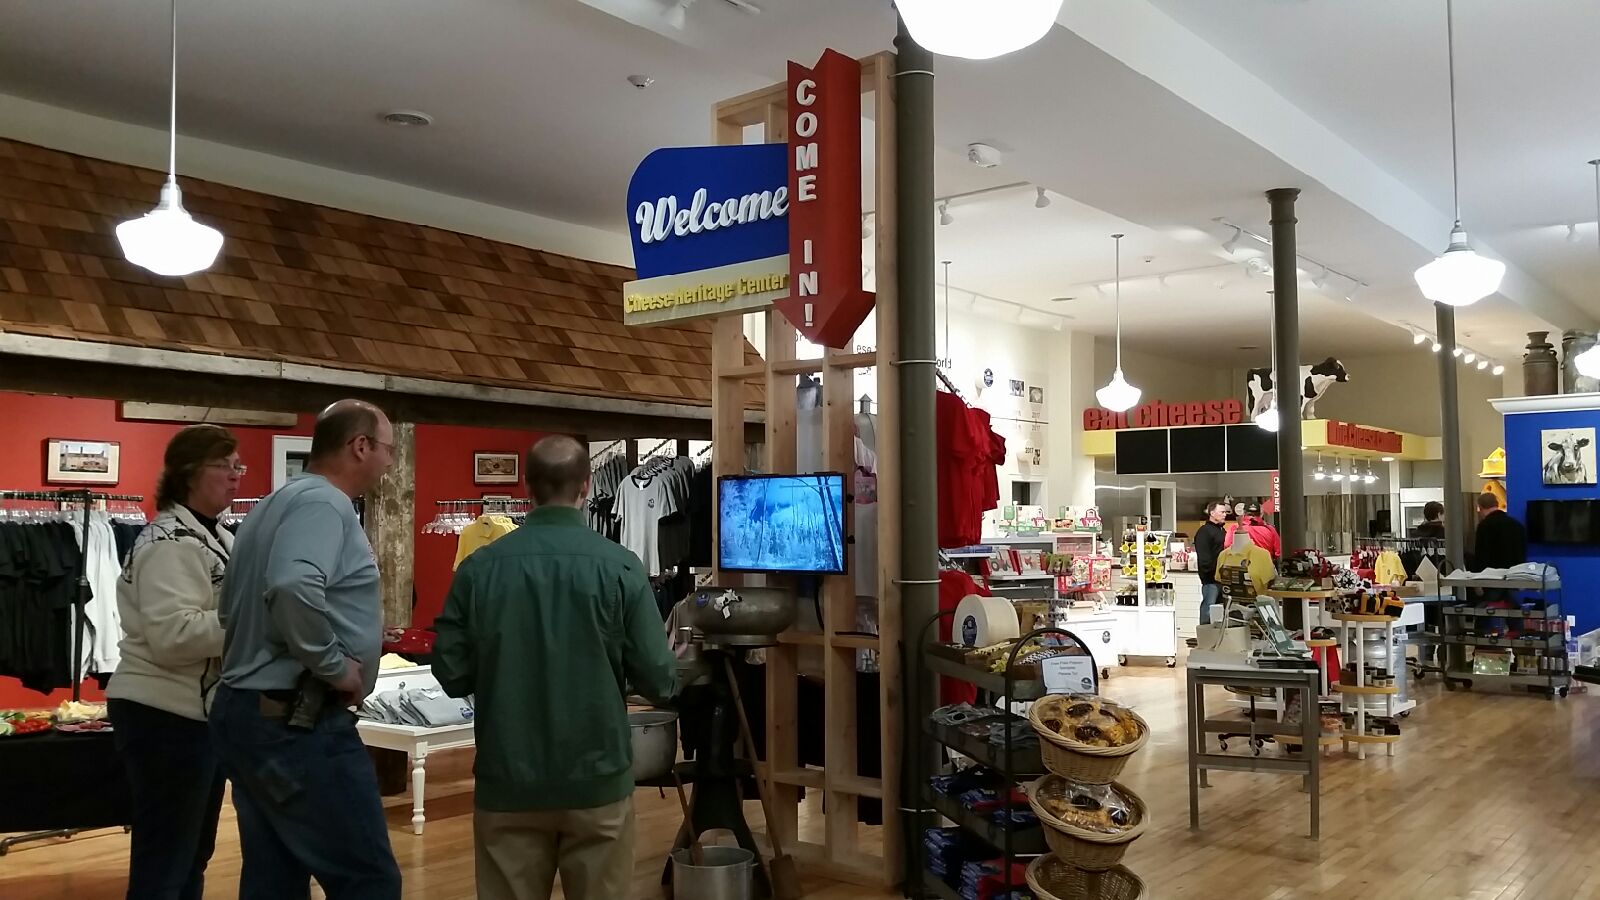 Interactive displays at the Dairy Heritage Center in Plymouth, Wisconsin